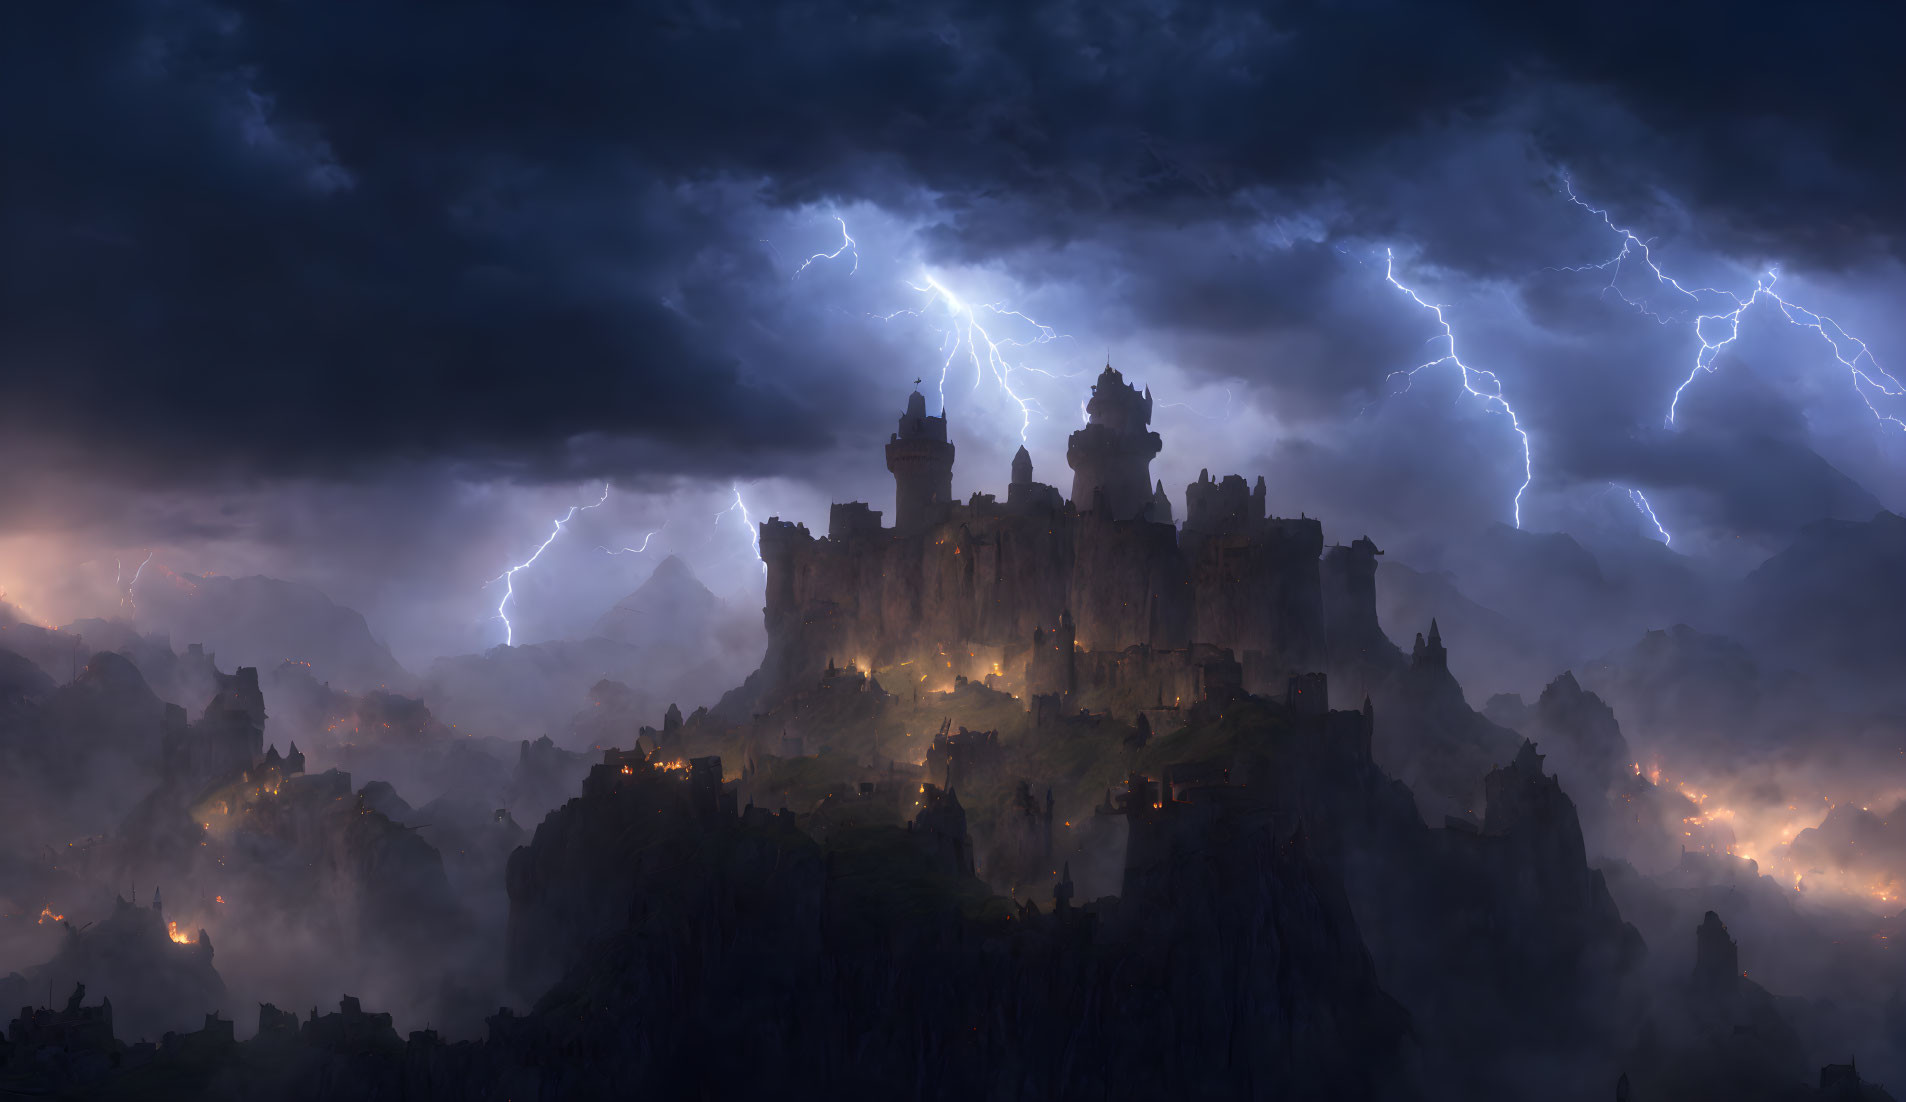 Castle on Cliffs Amid Stormy Sky with Lightning Strikes